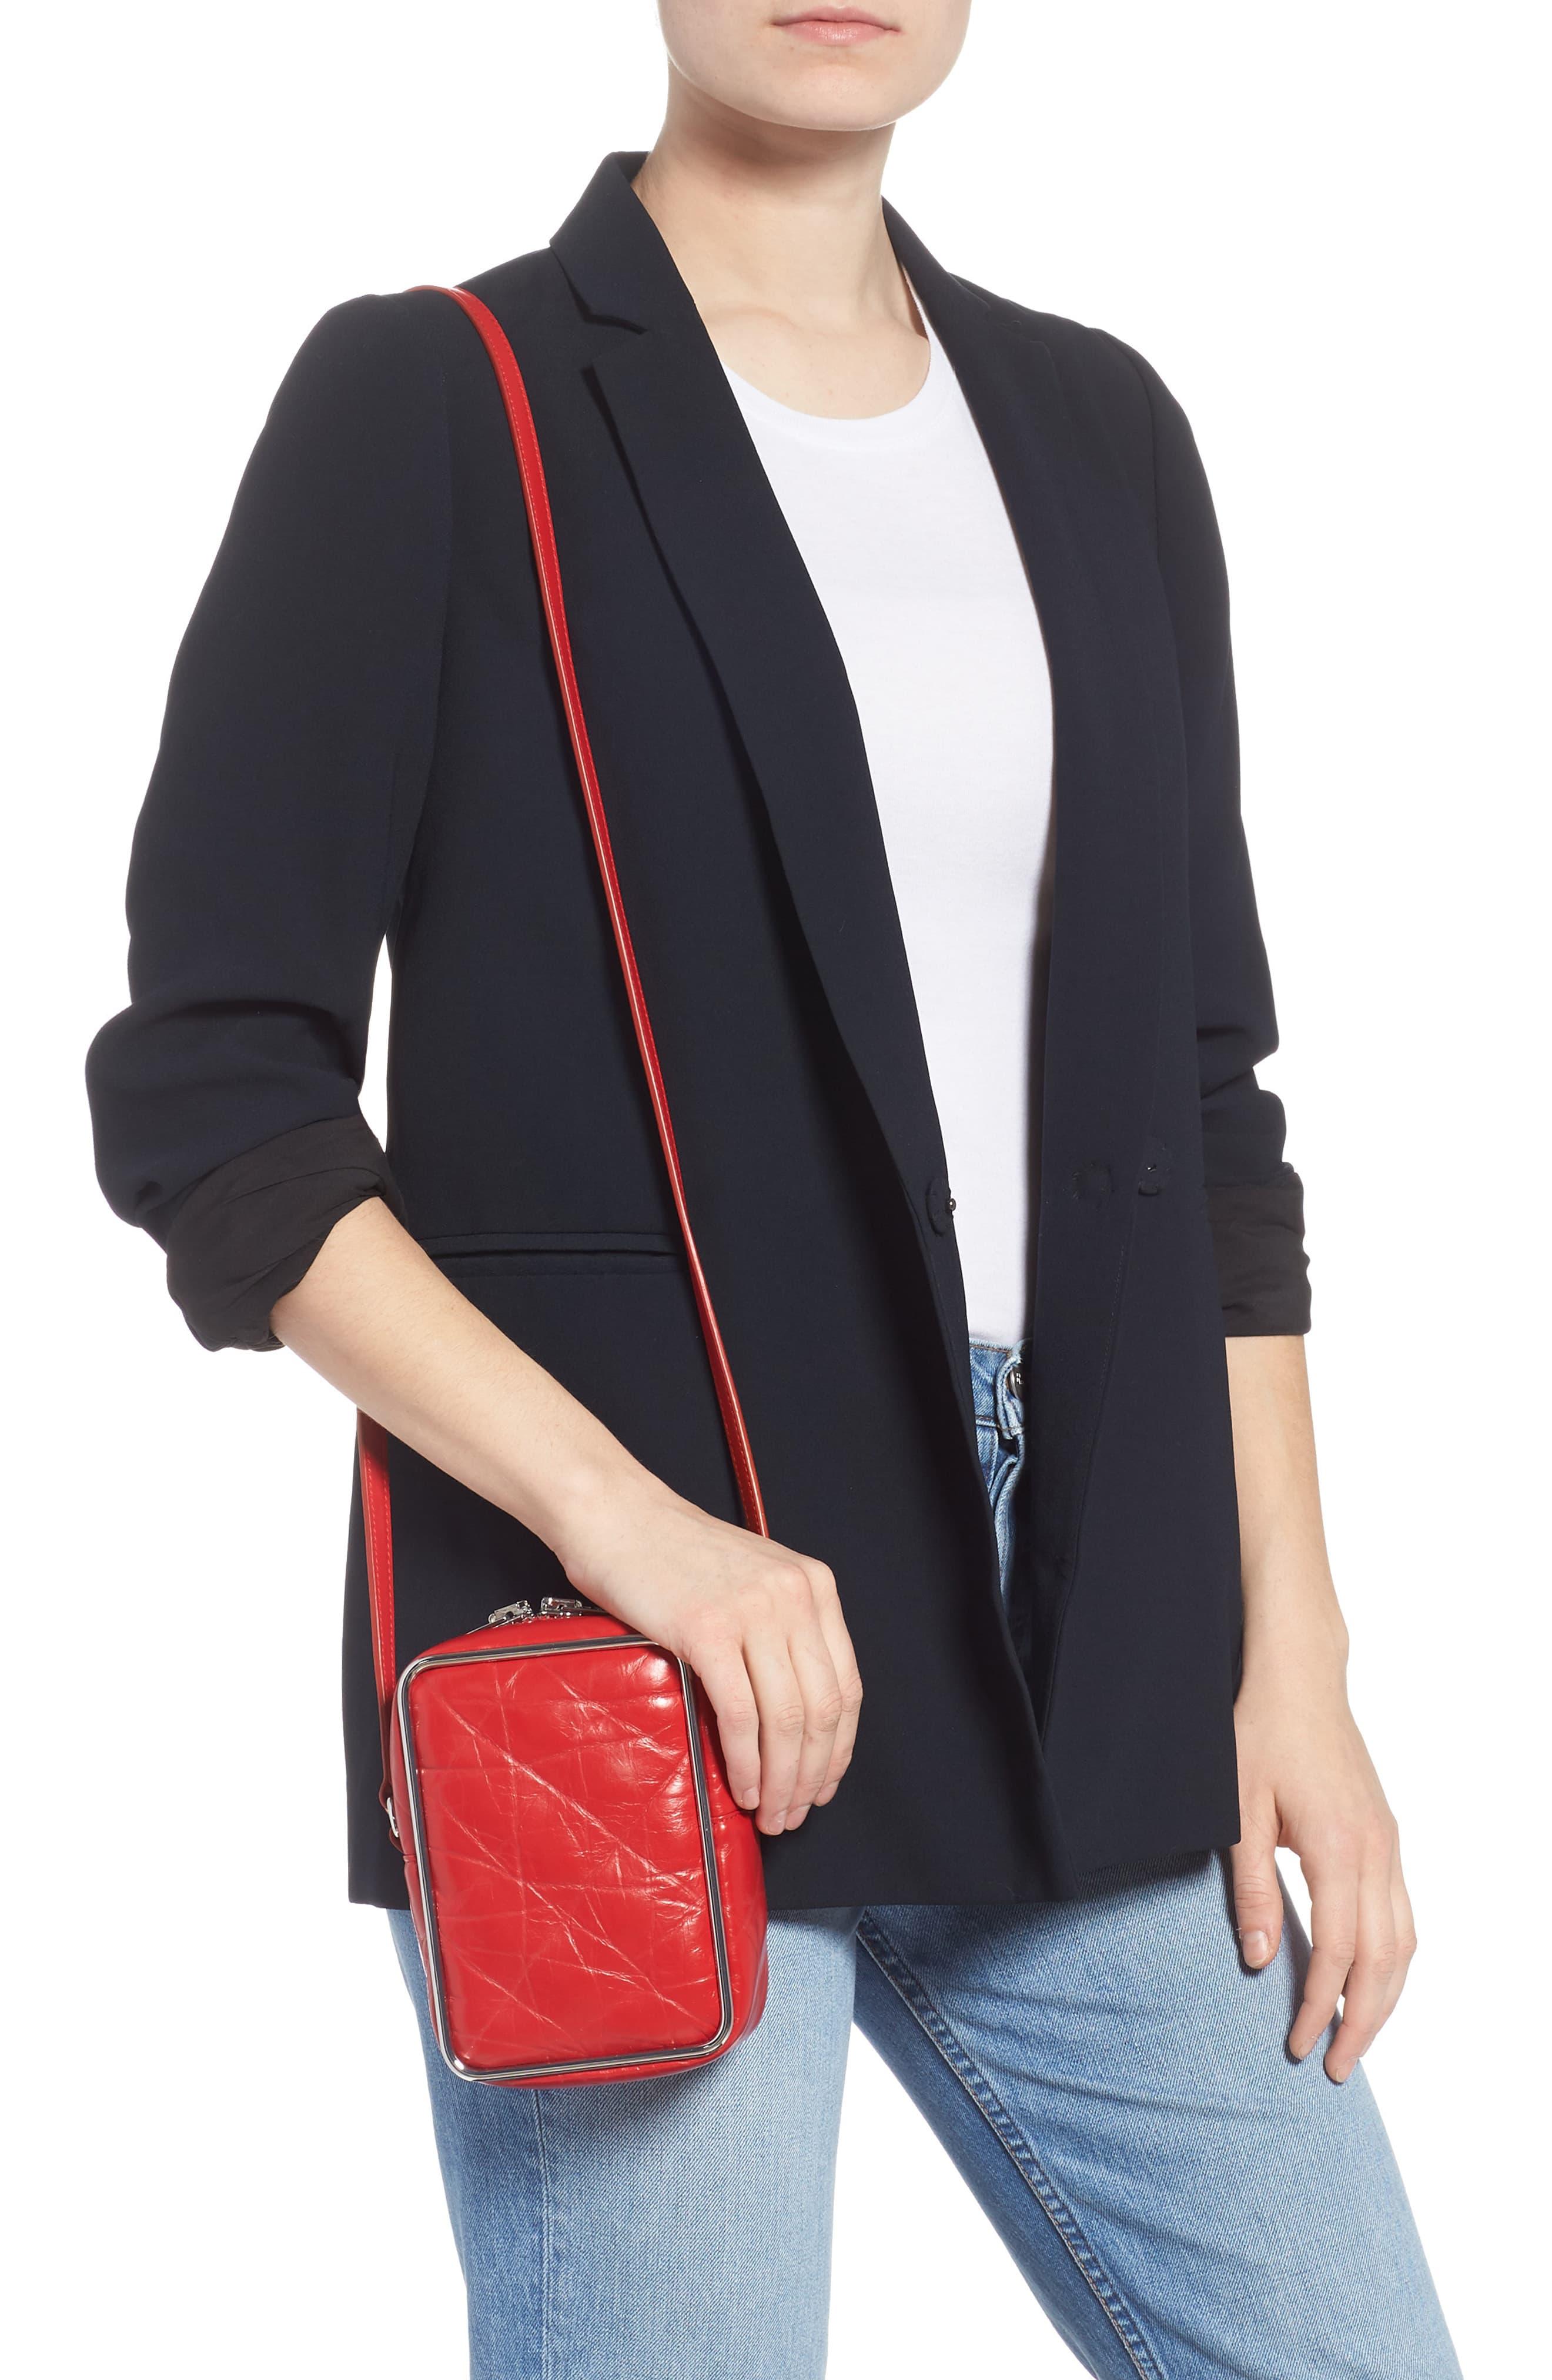 Alexander Wang Halo Leather Crossbody Bag in Red - Lyst